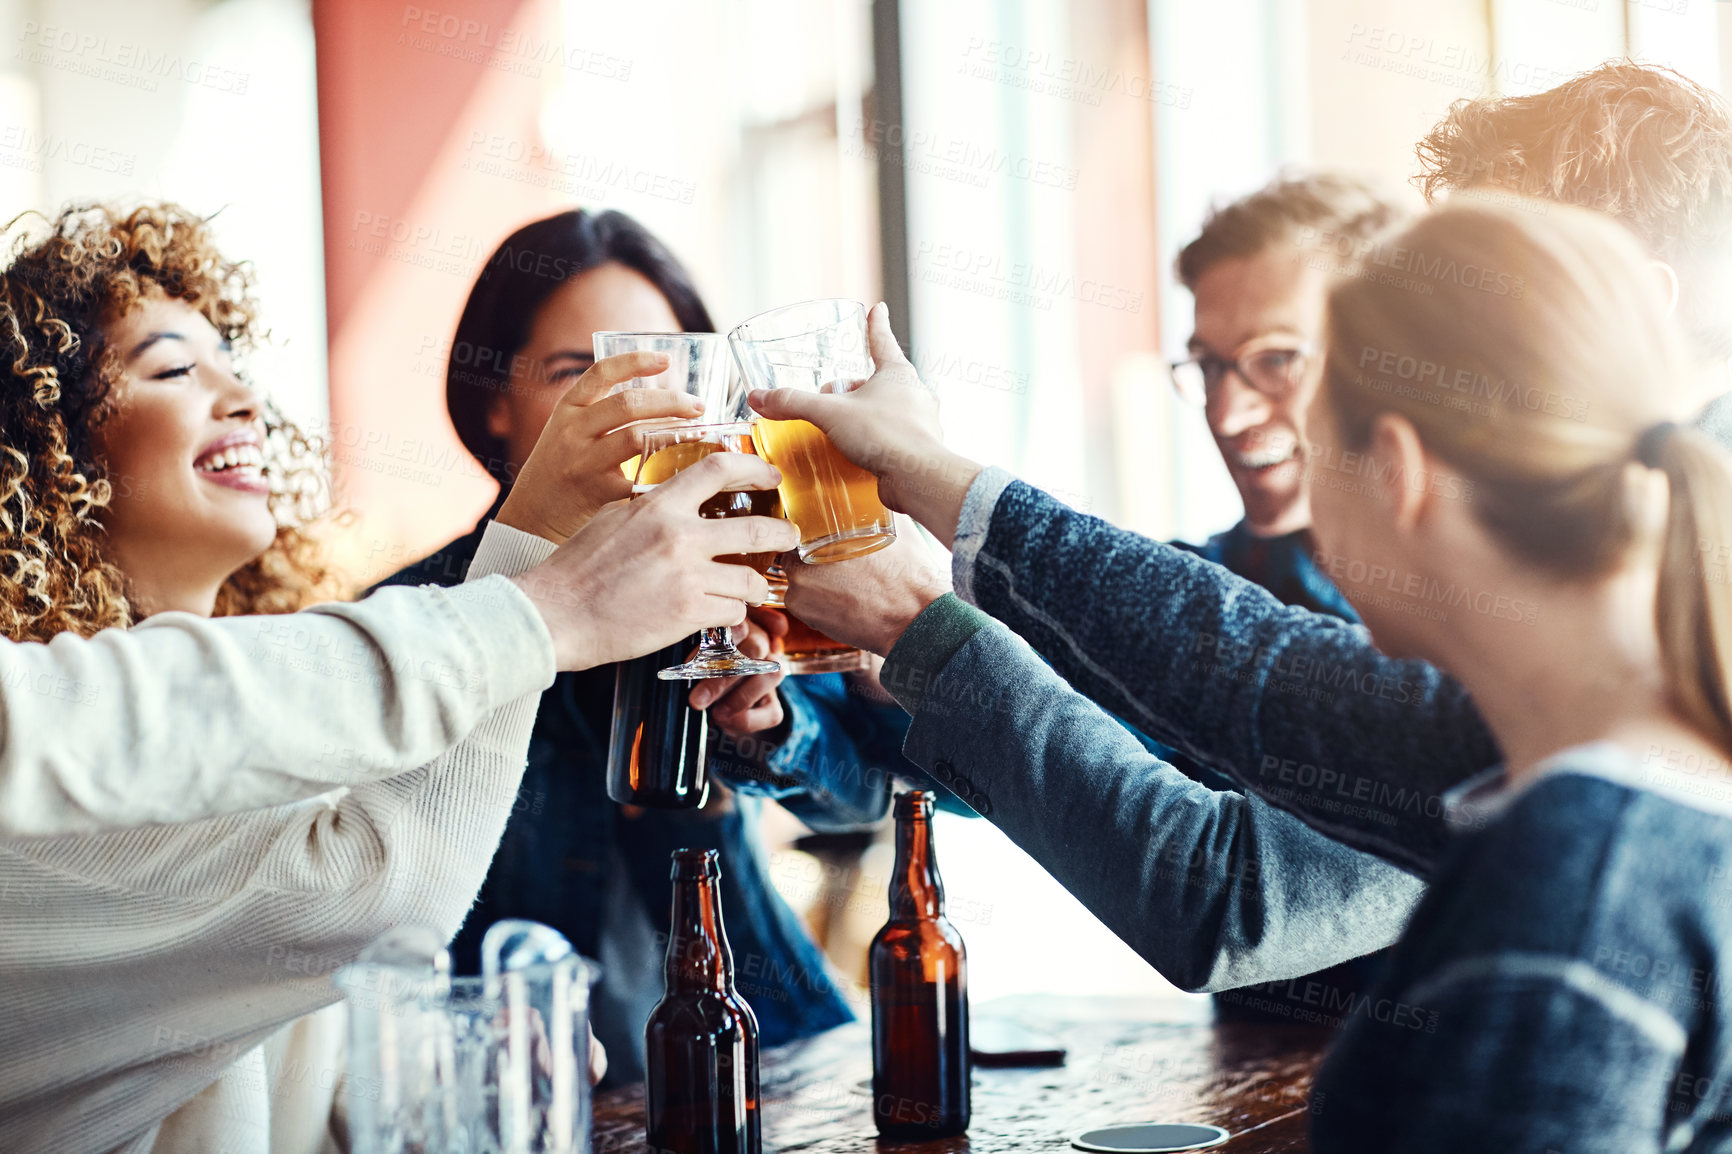 Buy stock photo Shot of a group of happy friends toasting with beers at a bar